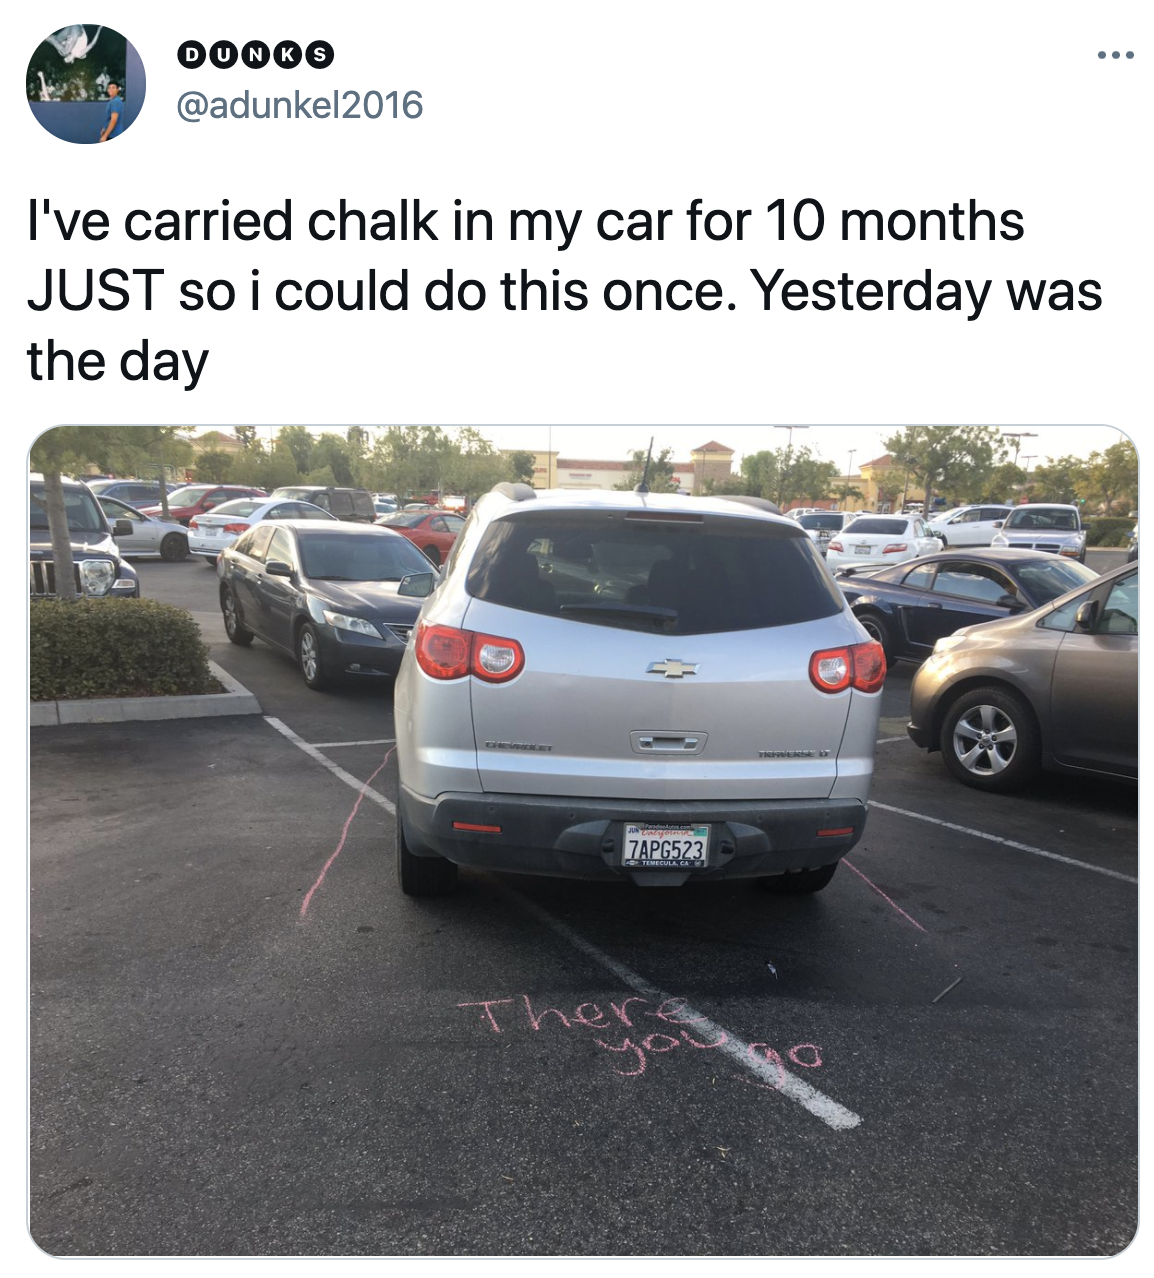 A person parked poorly